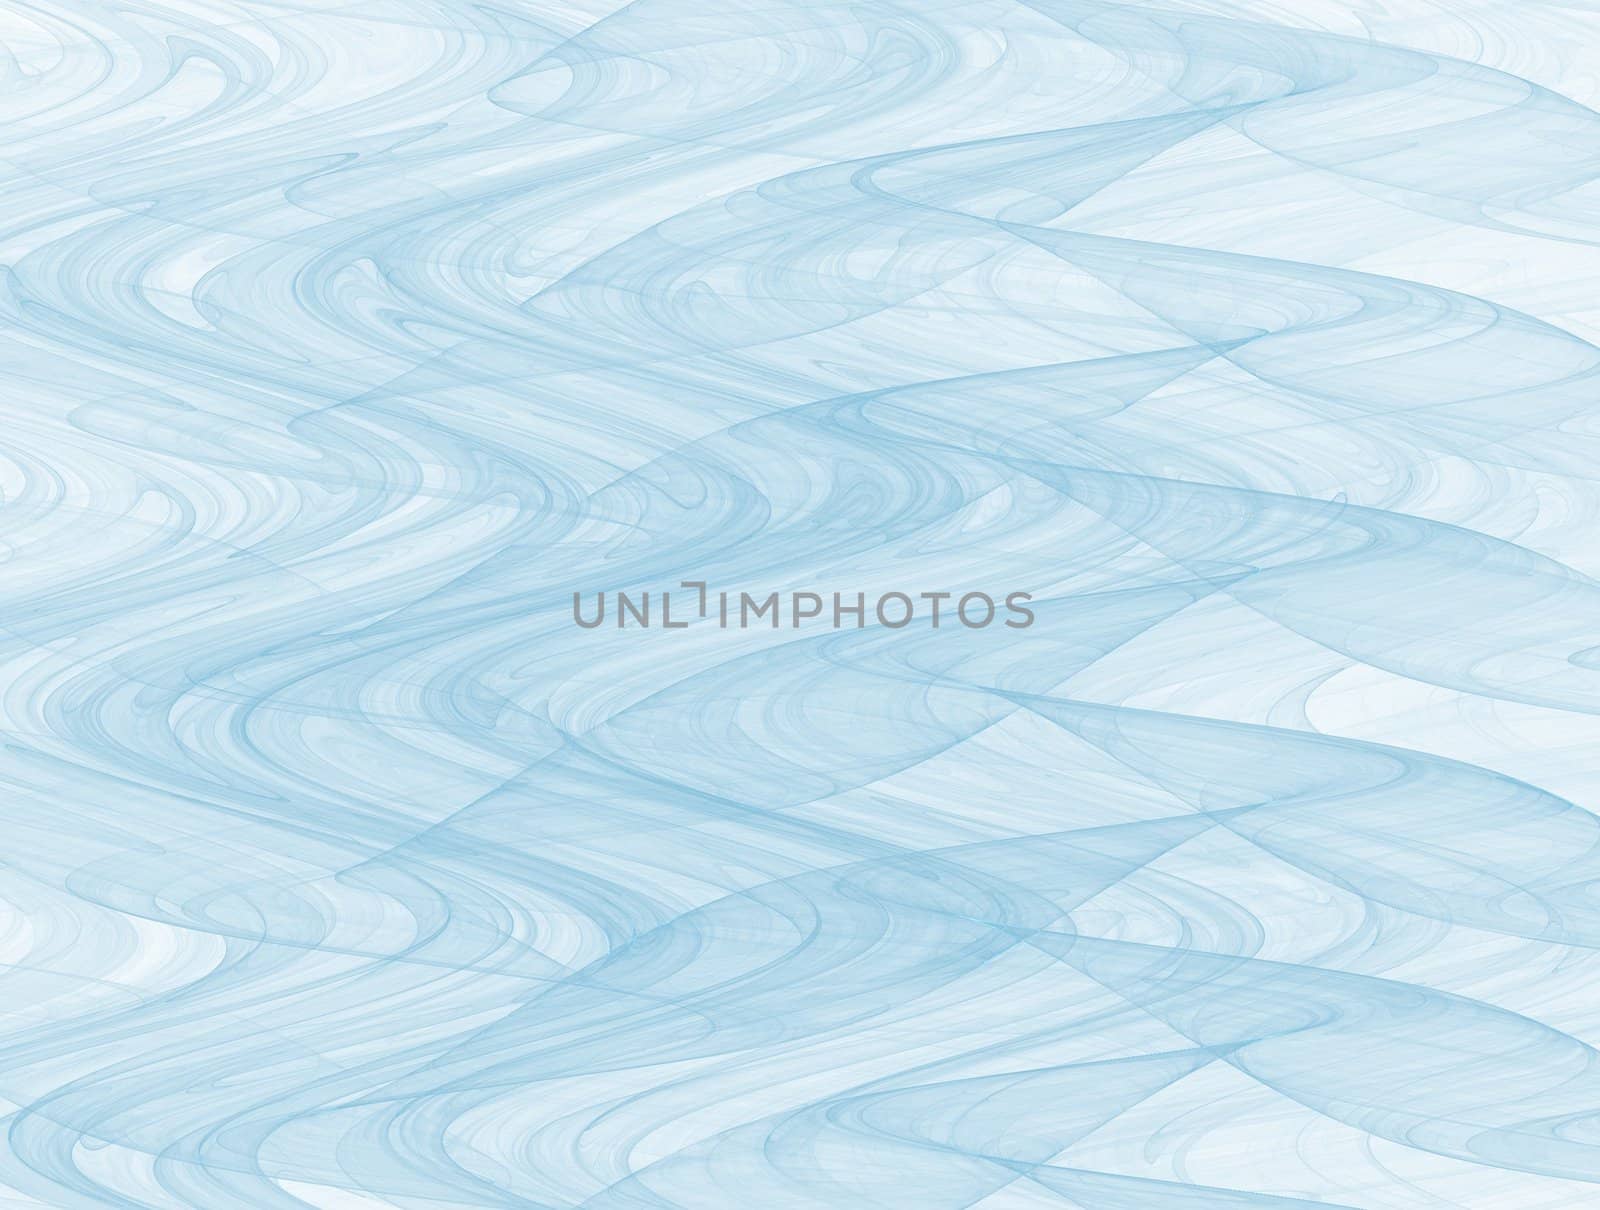 high res flame fractal filling the frame with light blue waves,zigzag